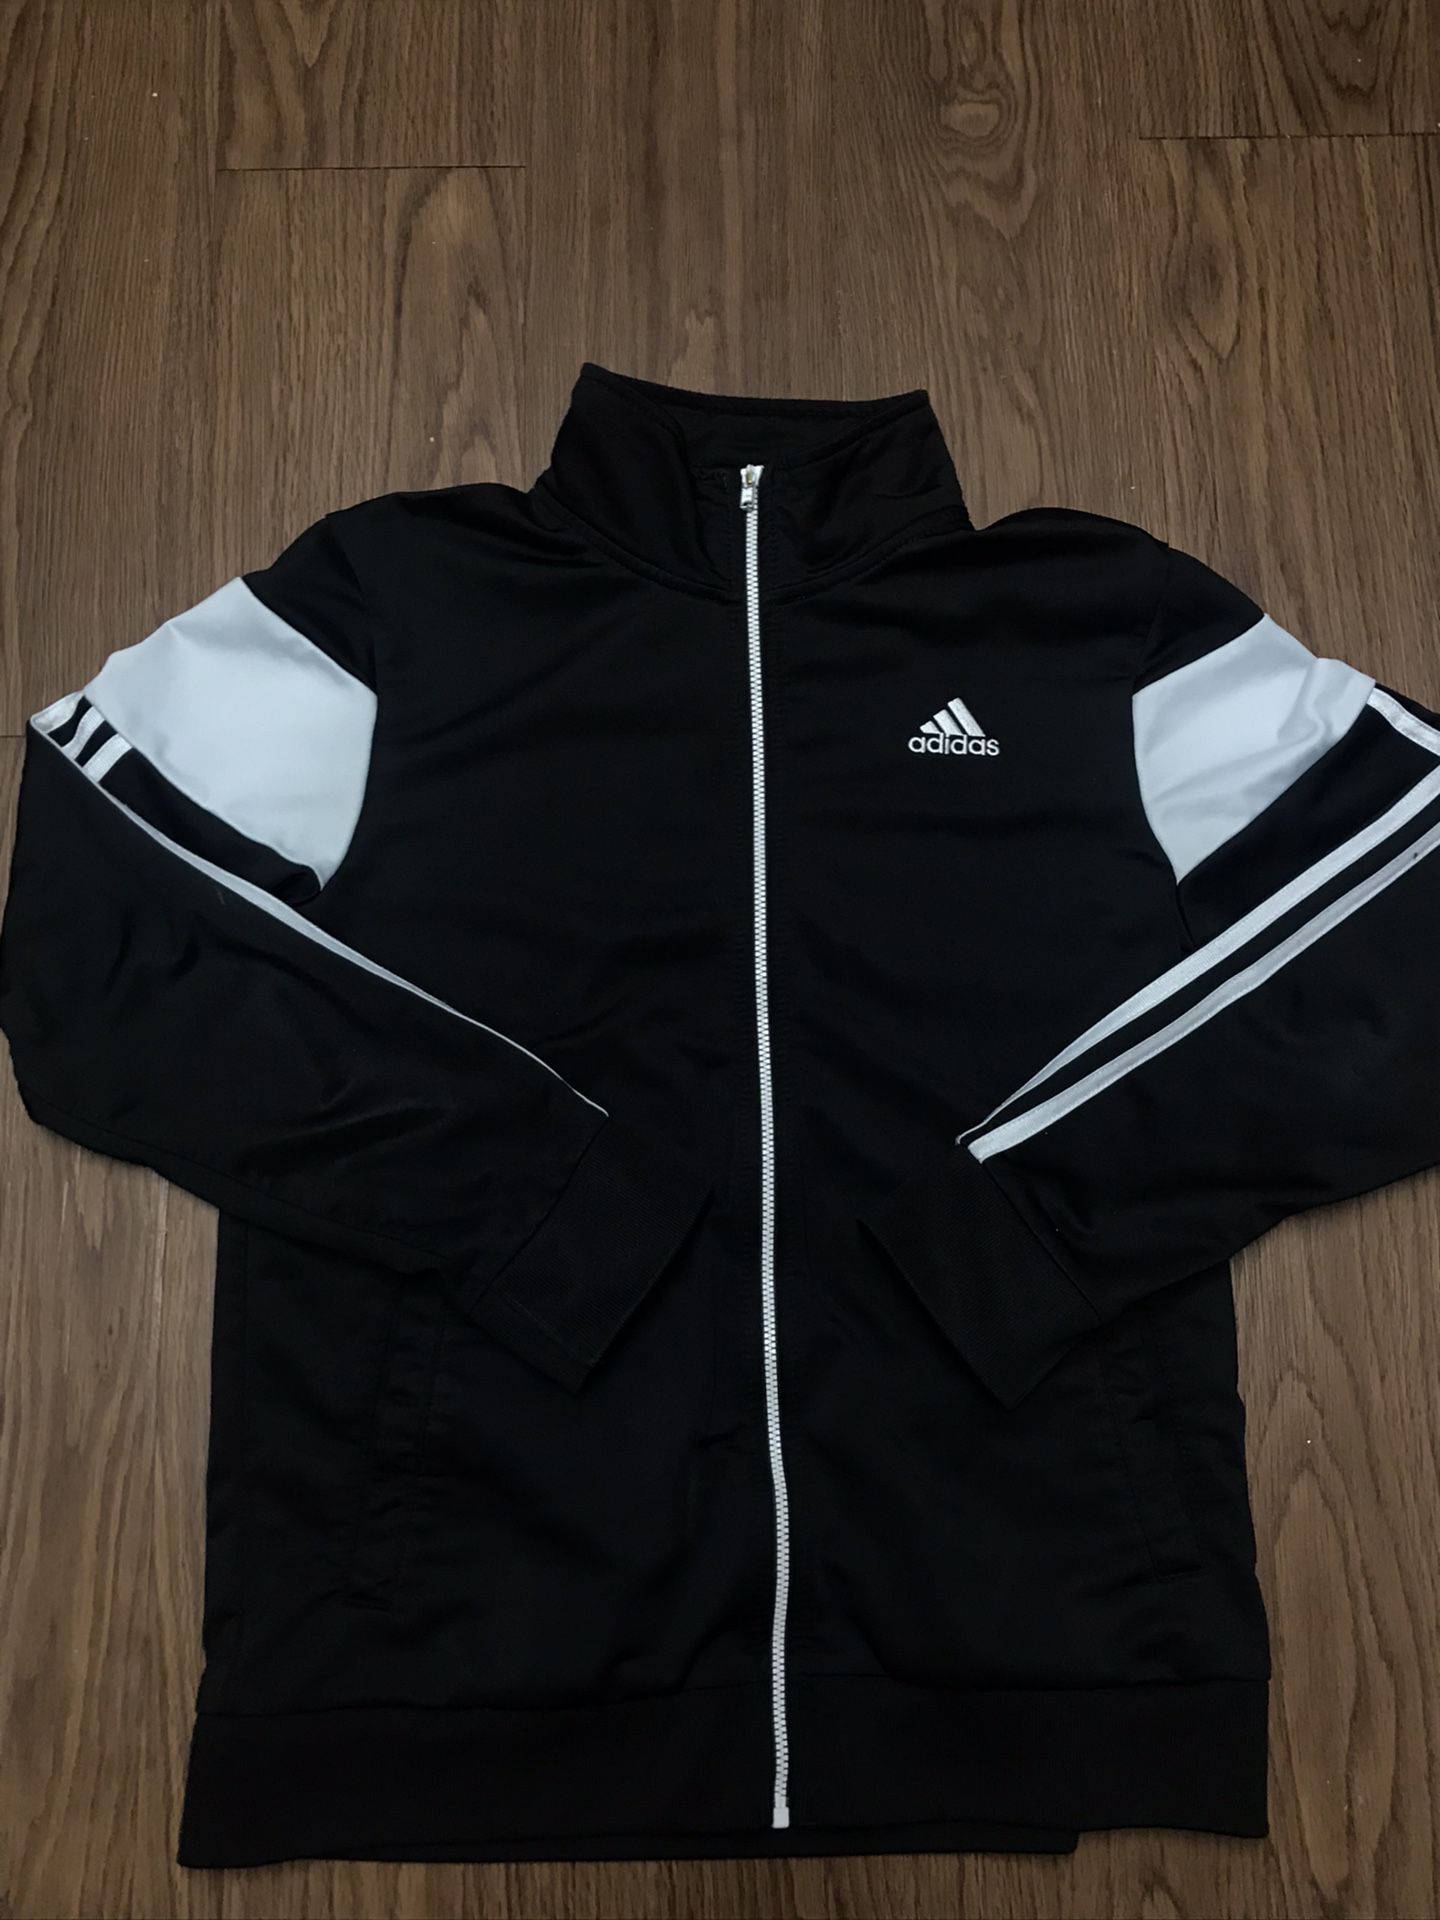 Adidas Zip Up Sweater Youth Large